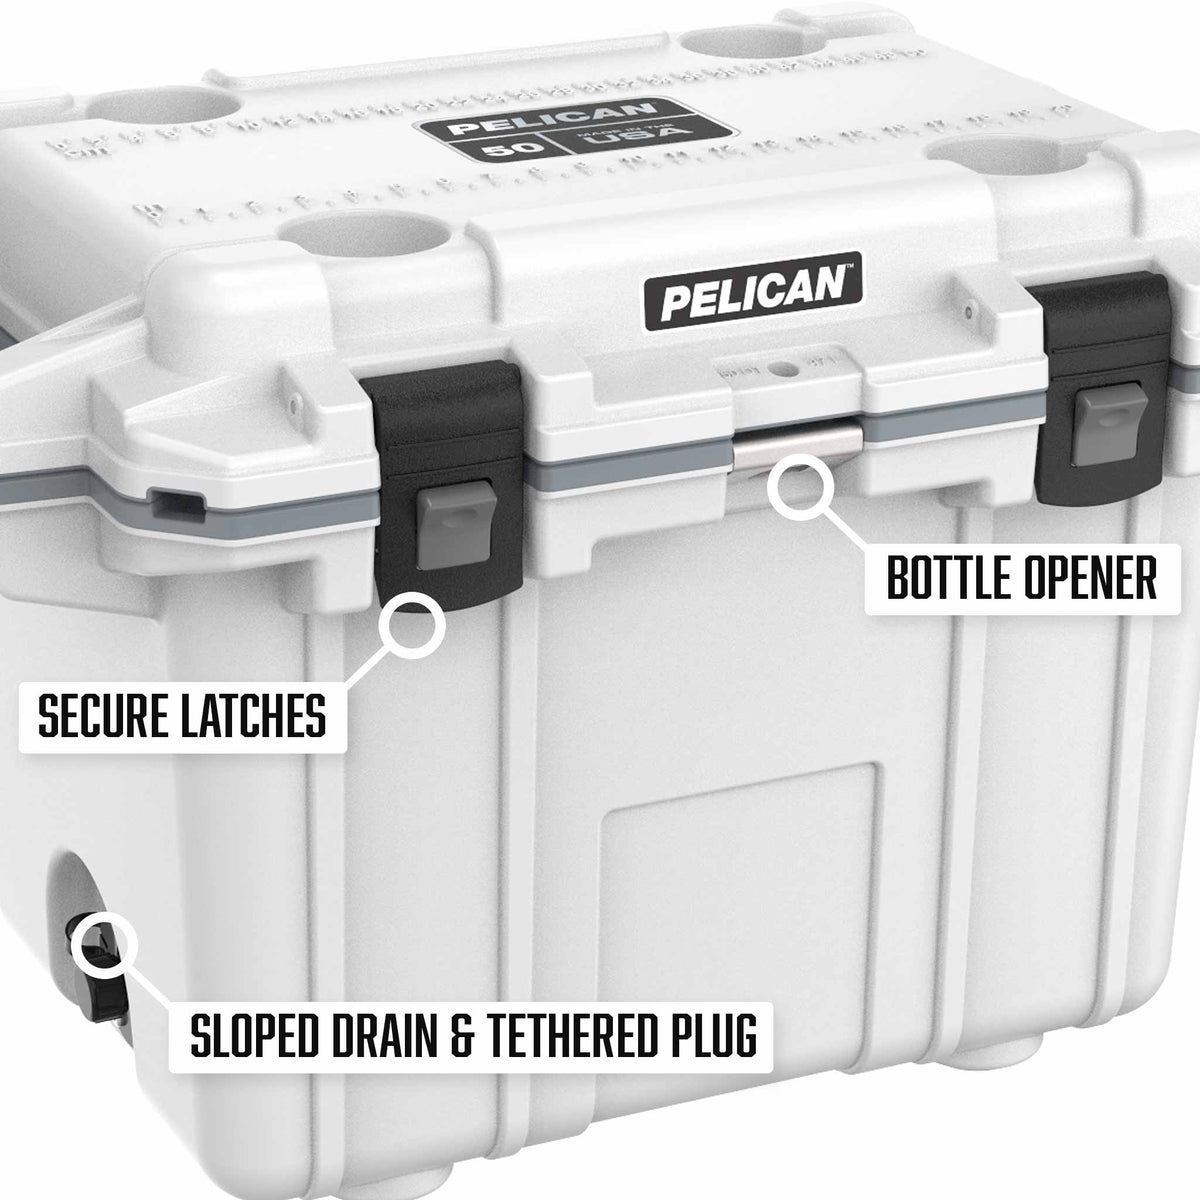 50QT Pelican Elite Cooler with secure latches, sloped drain &amp; tethered drain plug, and a built in bottle opener